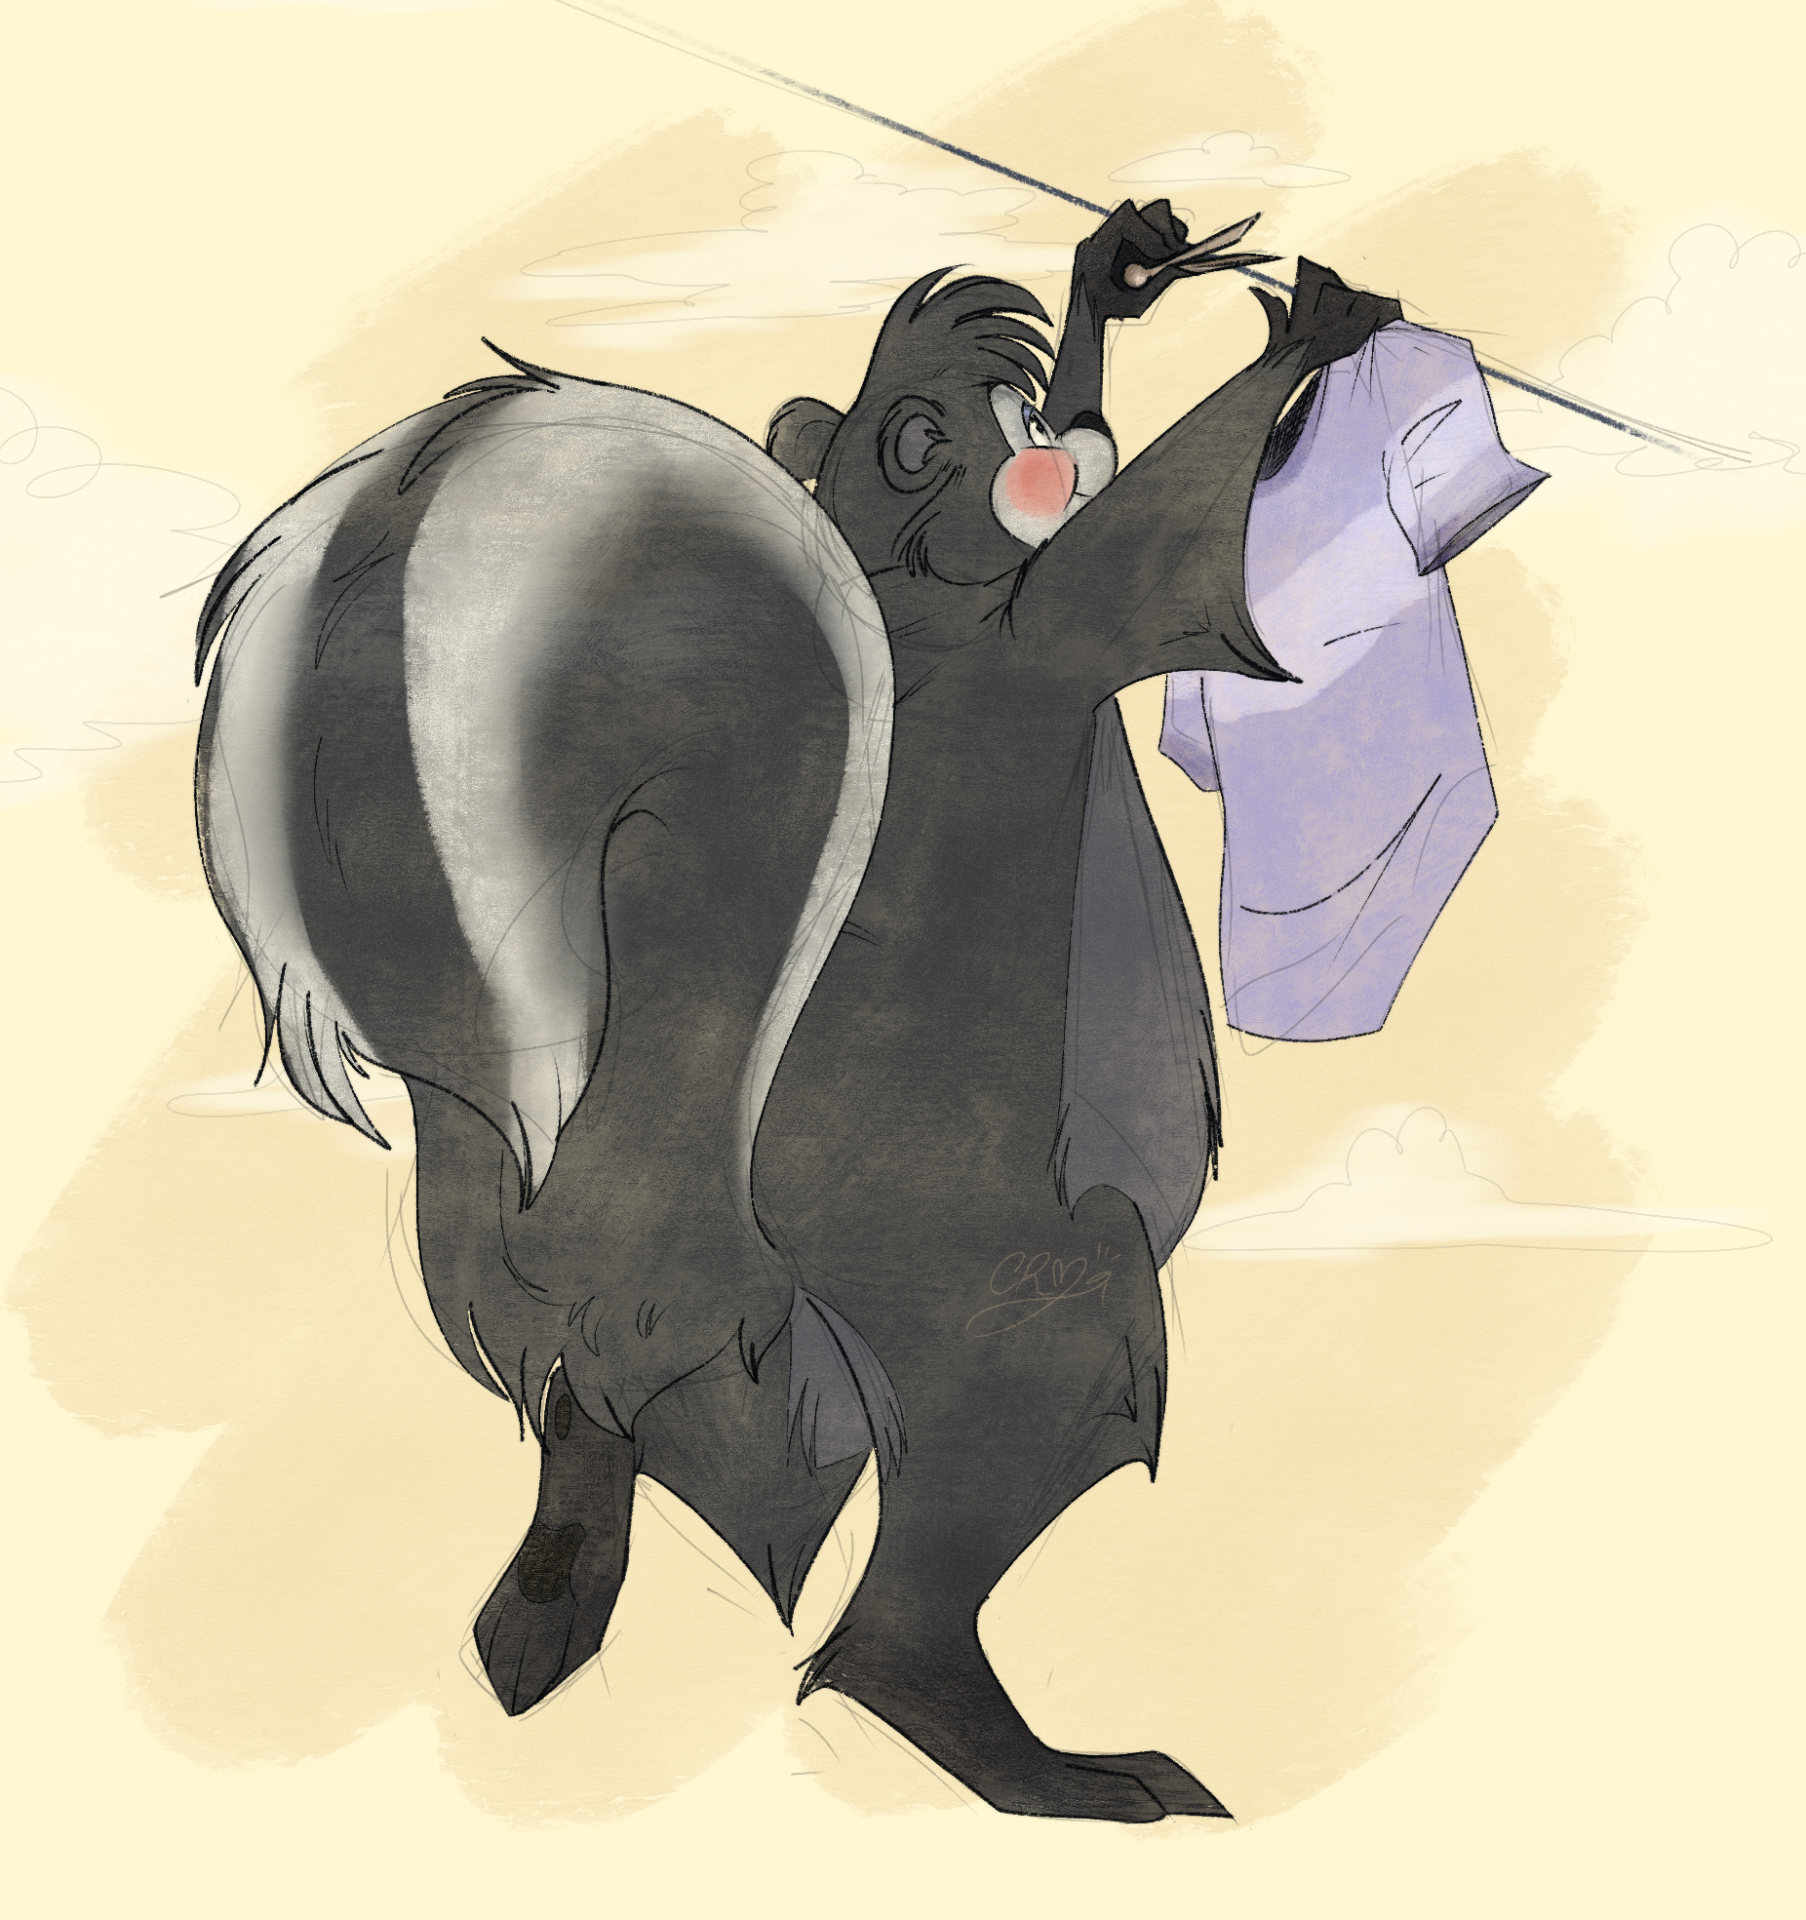 Daily Chores of a skunk.